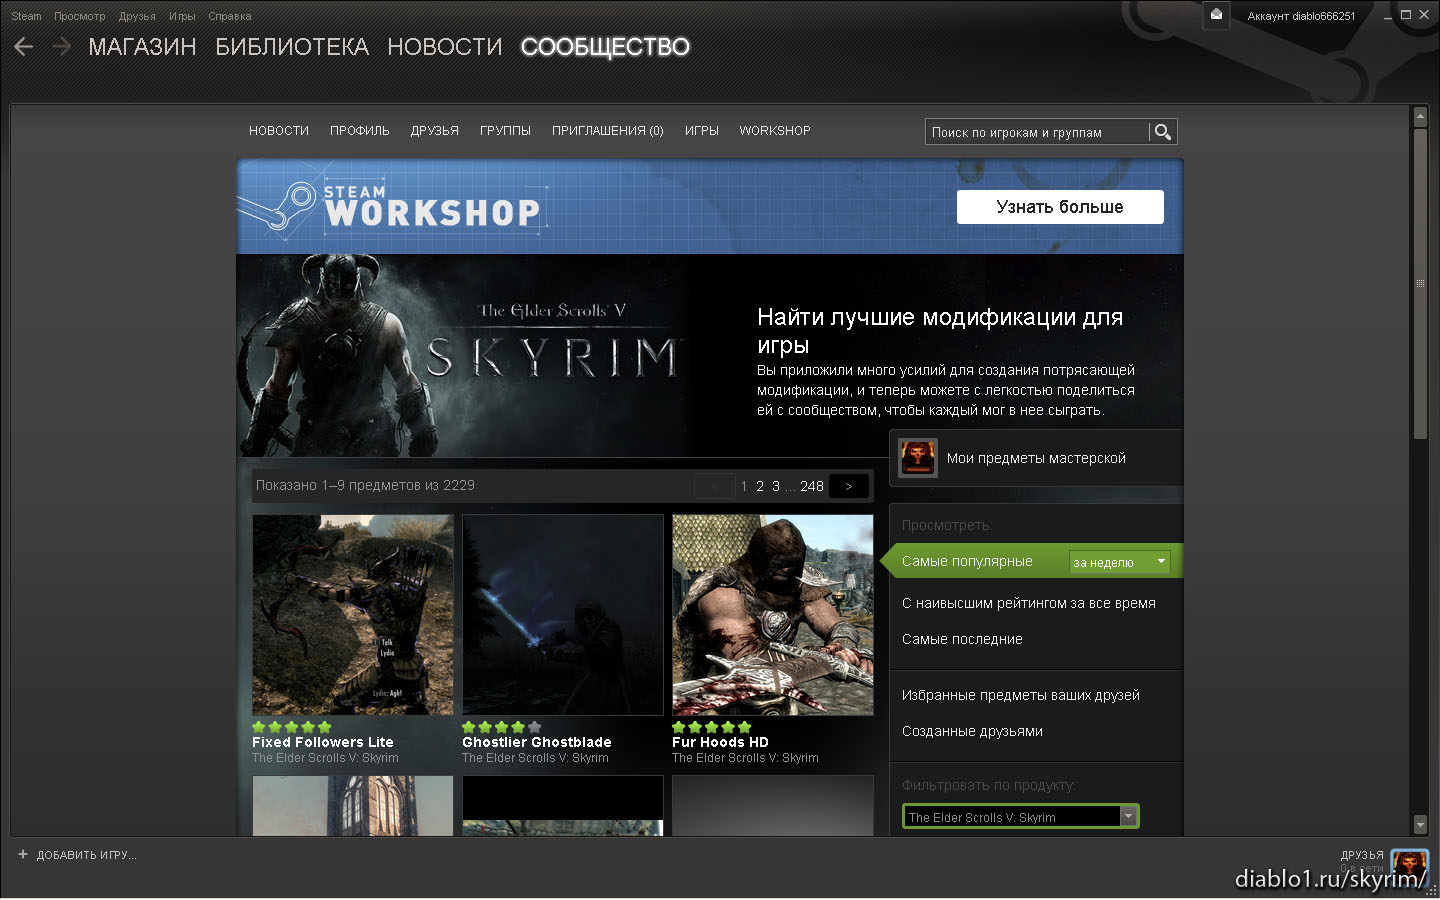 download steam workshop mods without owning the game